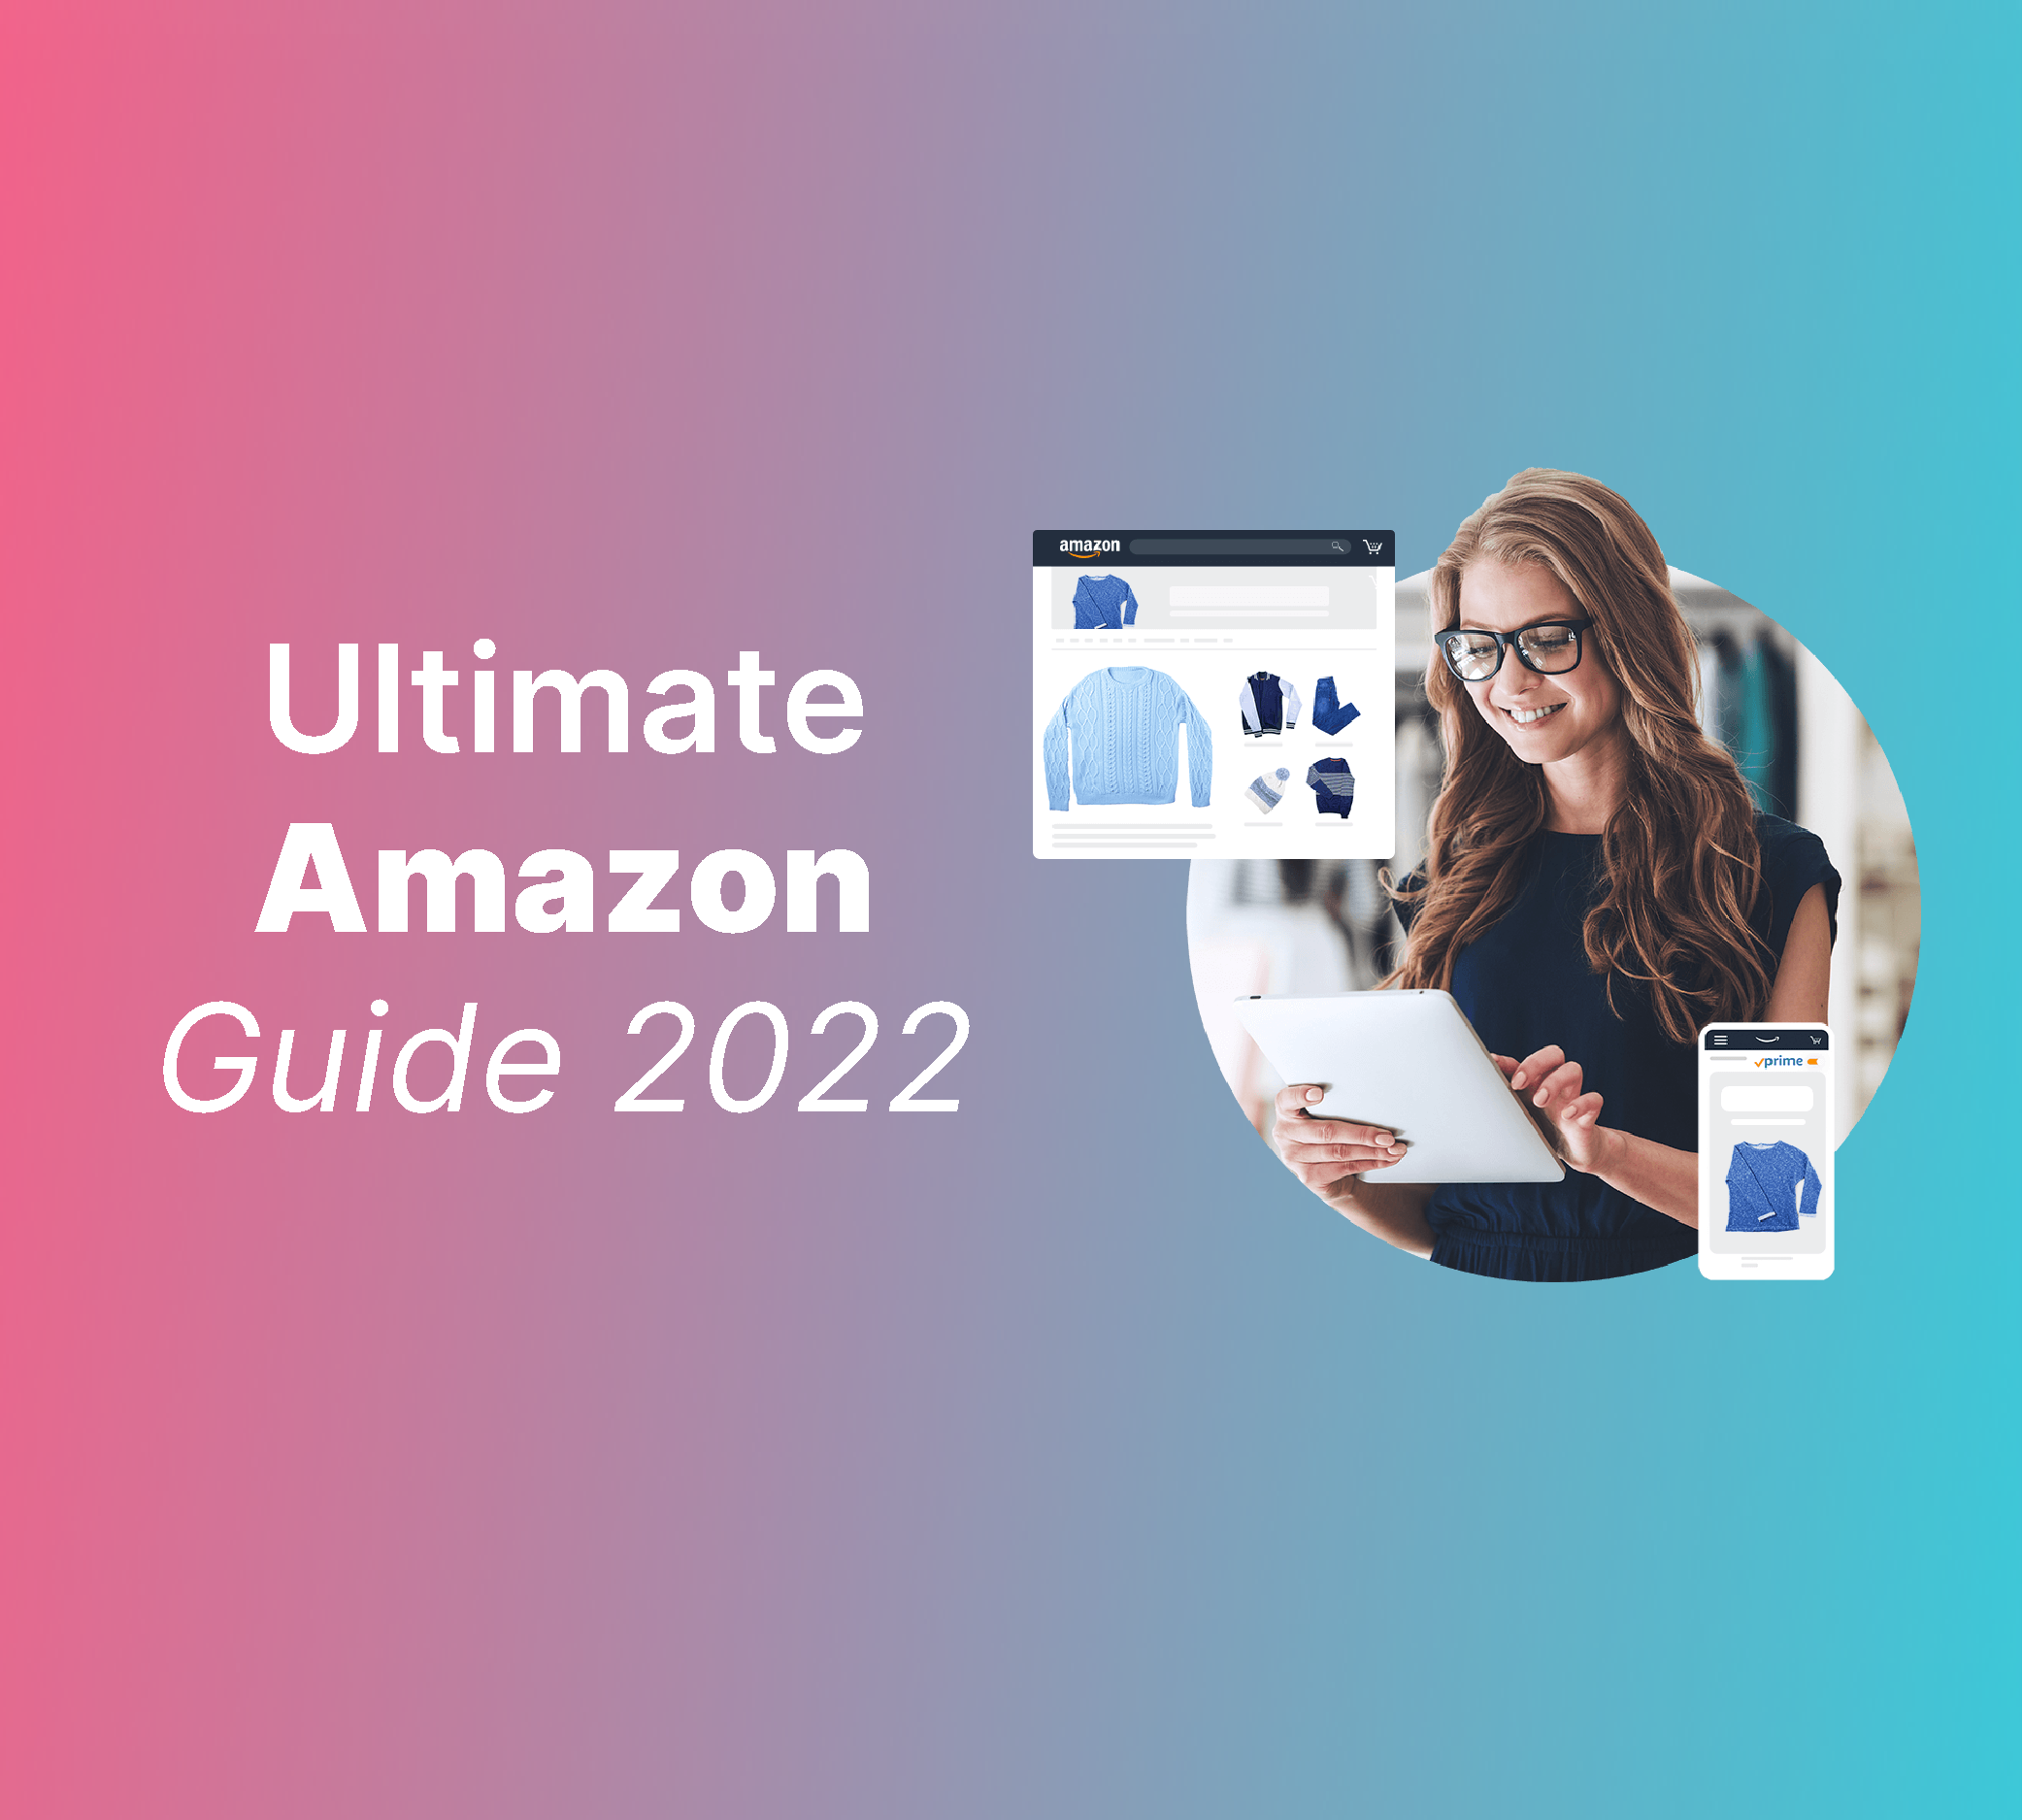 The ultimate Amazon guide for 2022